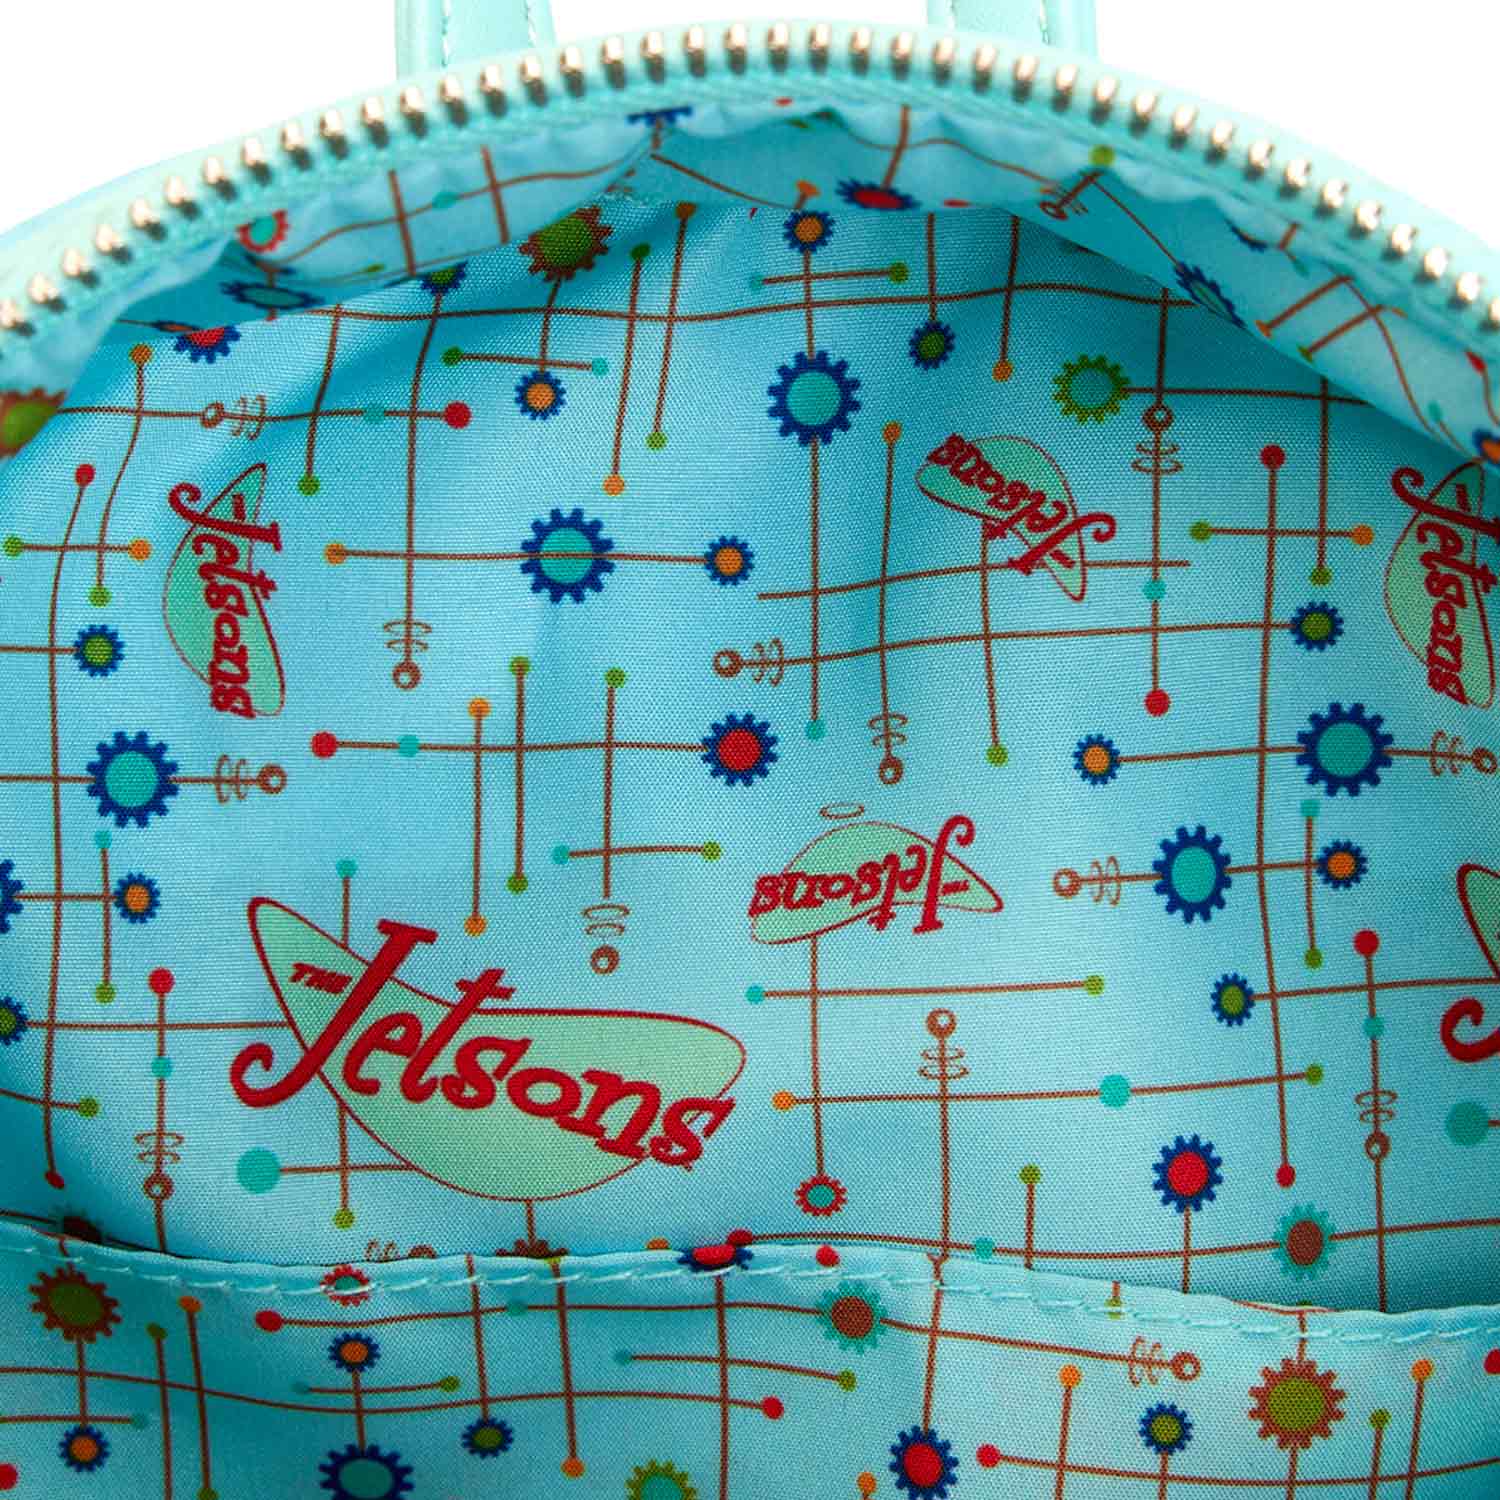 Loungefly x The Jetsons Spaceship Mini Backpack